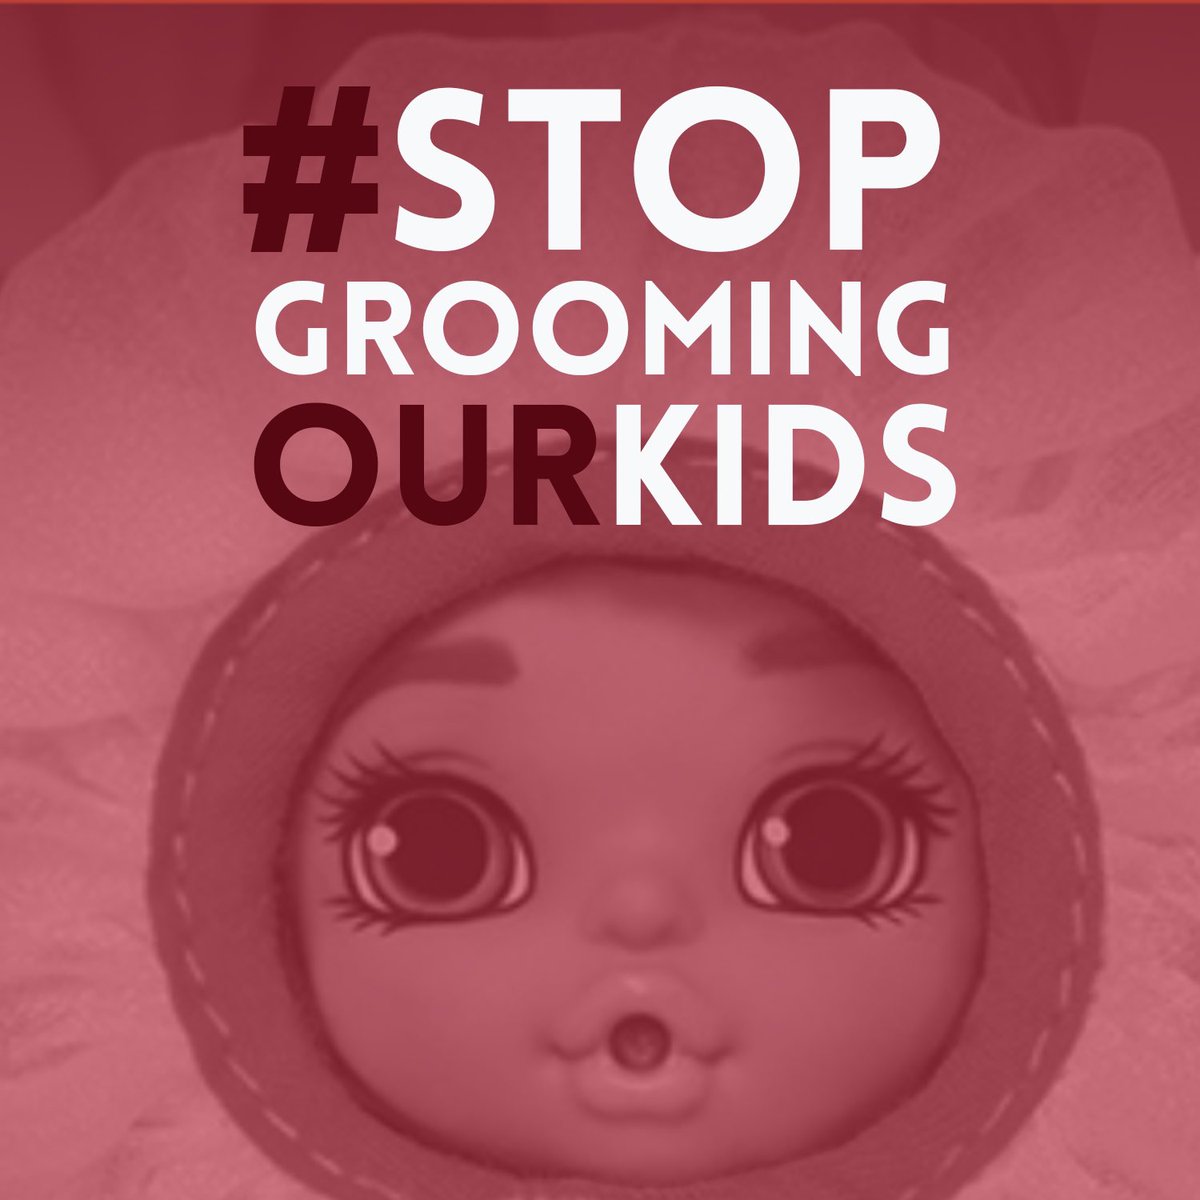 Spread the word and bring awareness to this unjust practice! #StopGroomingKids